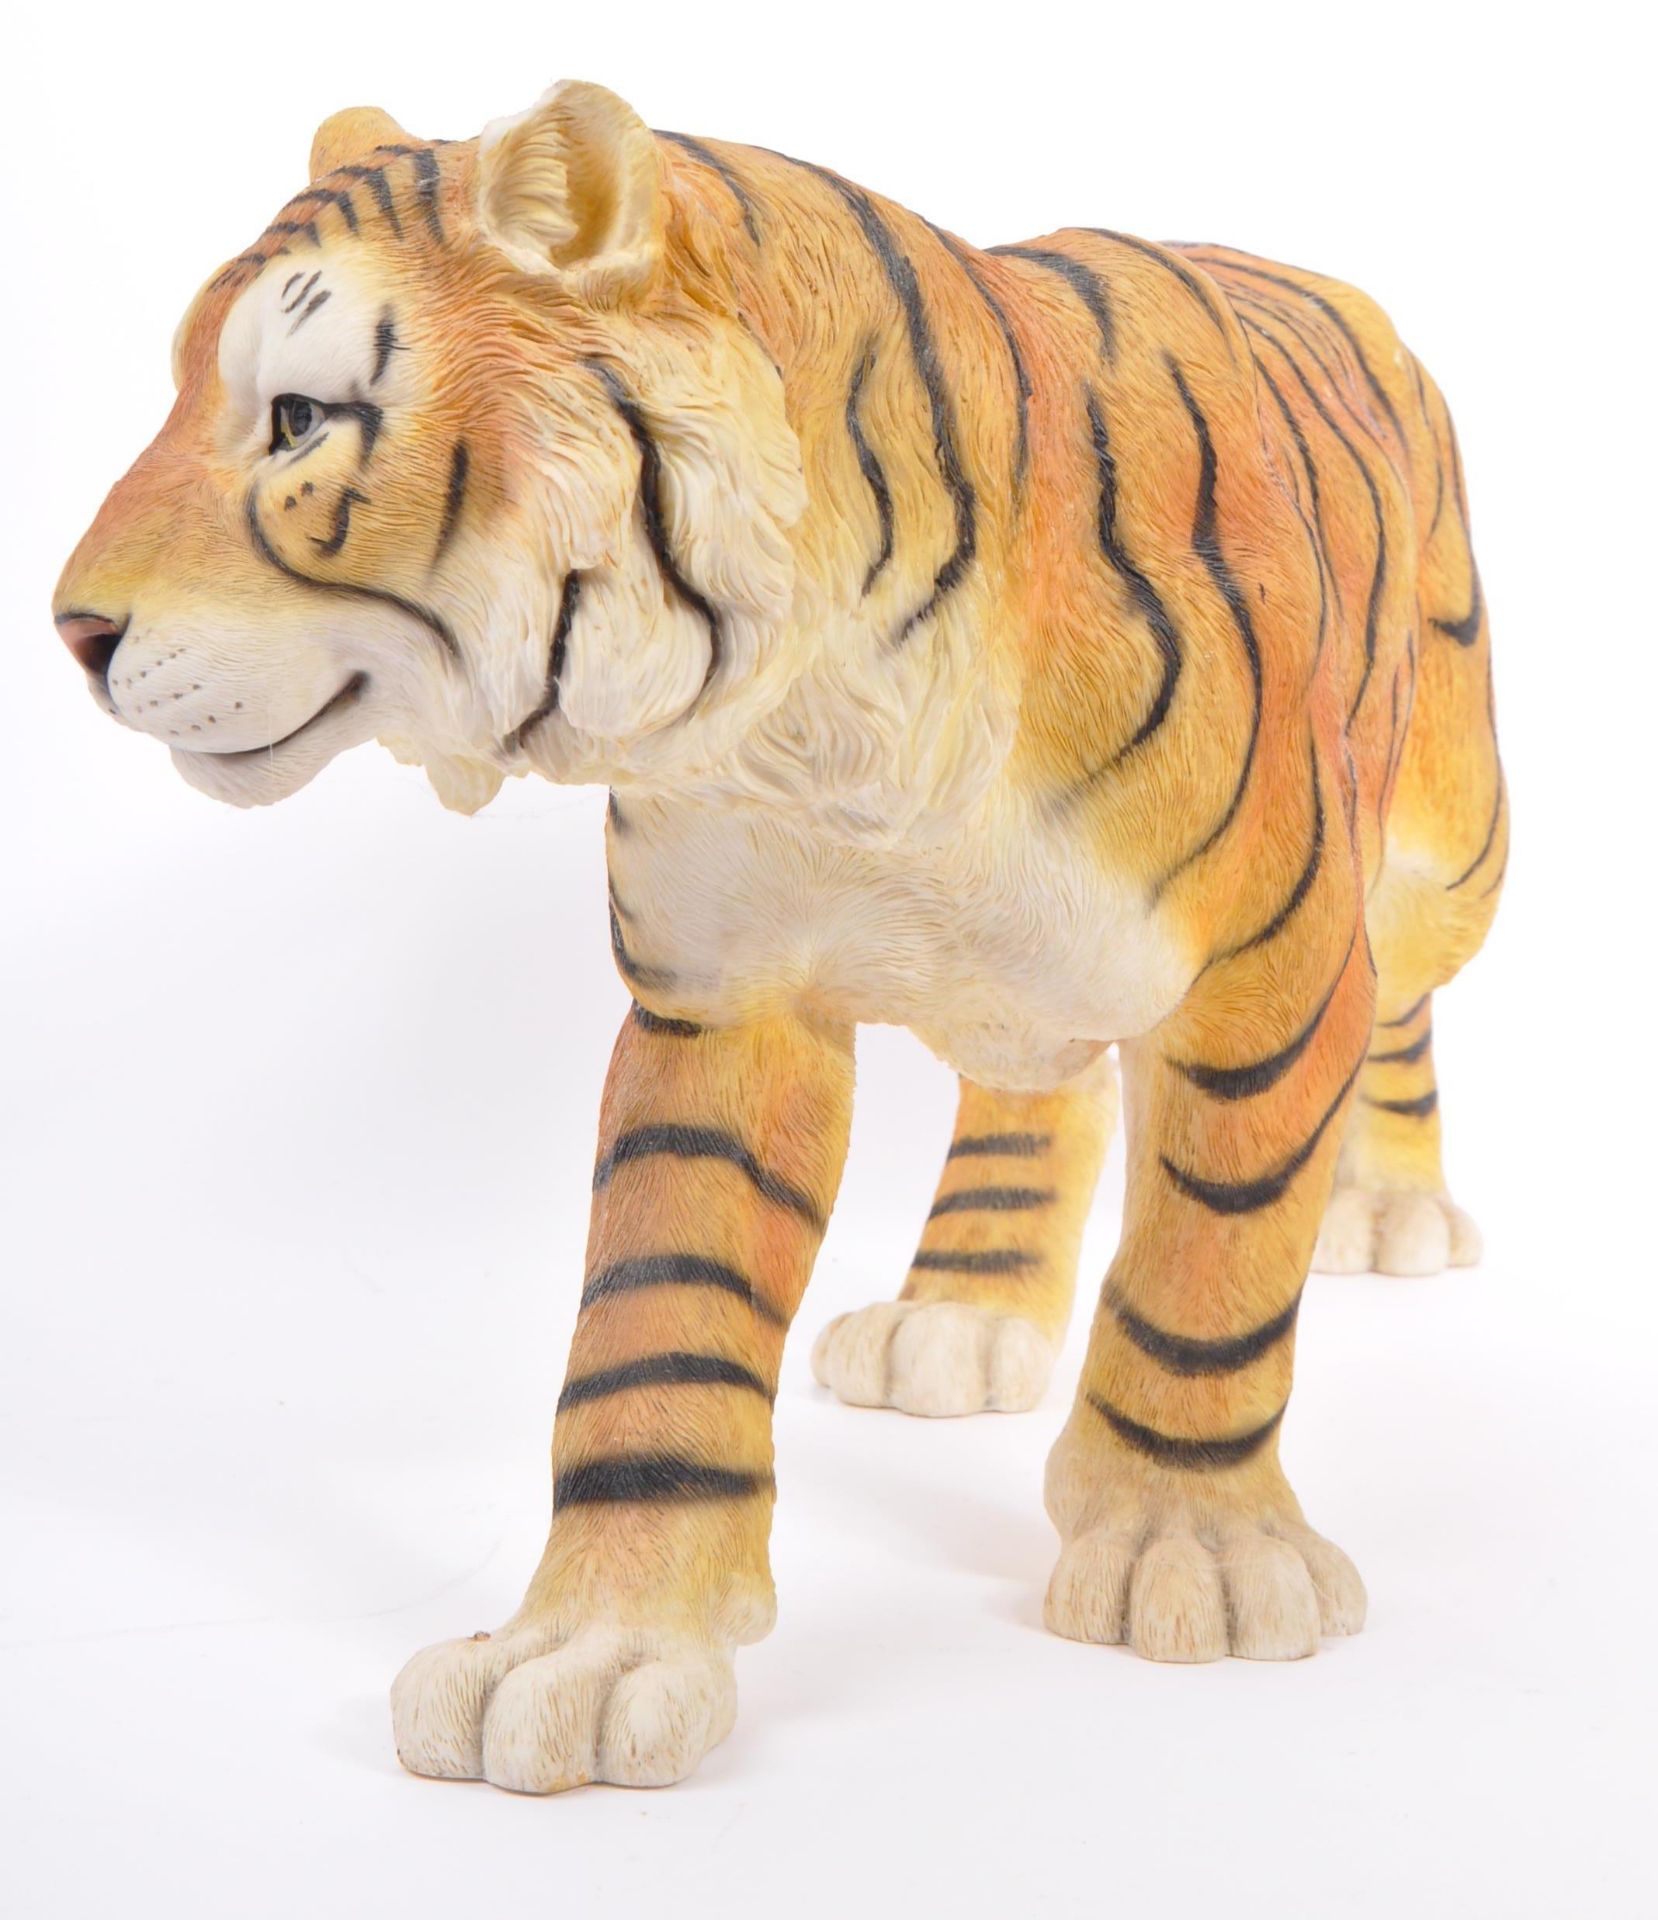 COLLECTION OF OF RESIN TIGER FIGURINES BY THE JULIANA COLLECTION - Image 5 of 13